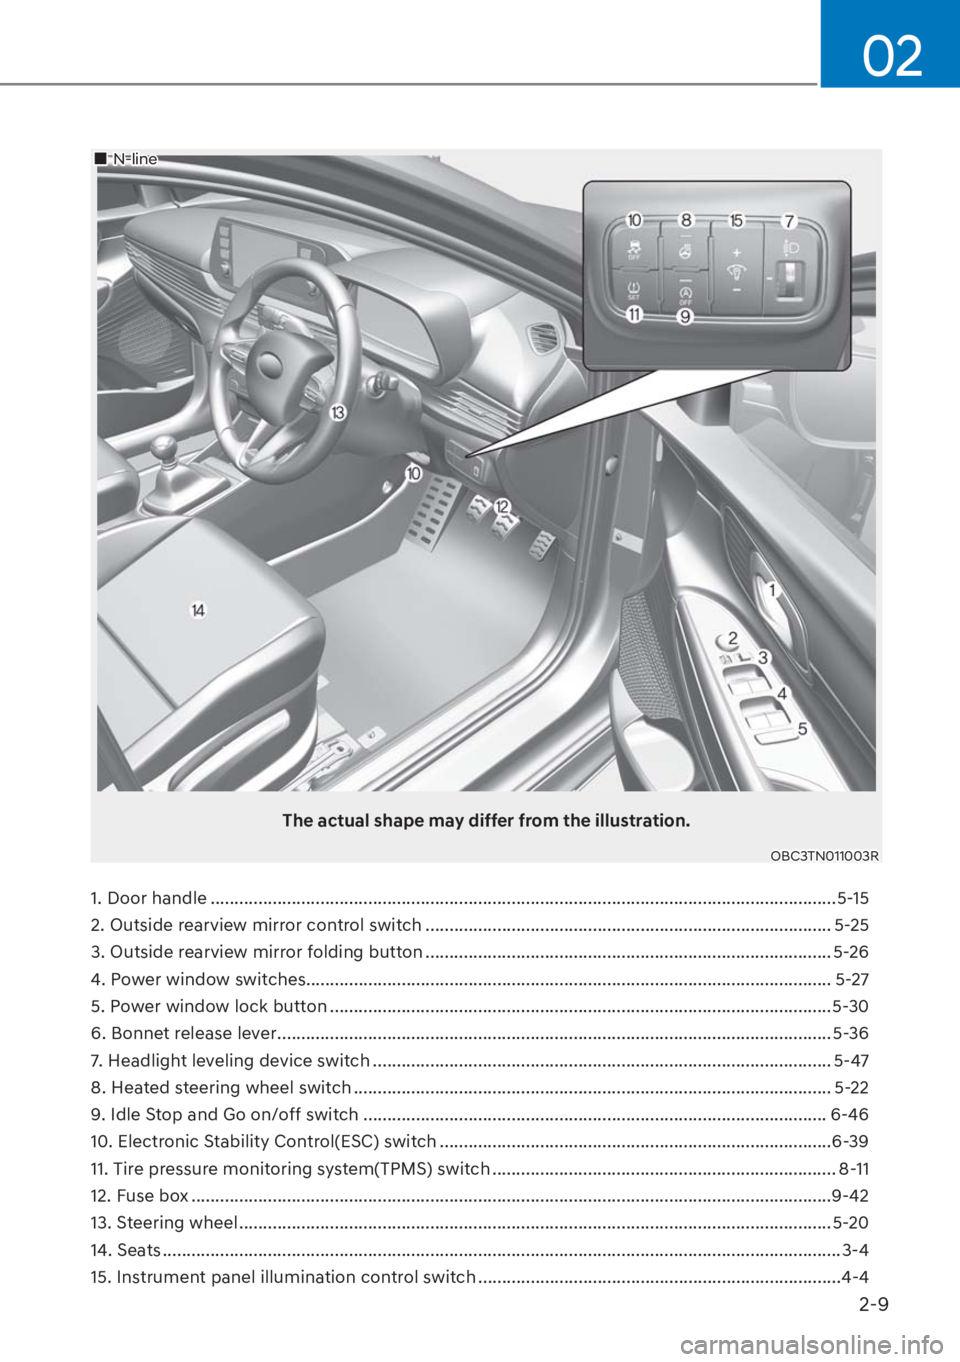 HYUNDAI I20 2023  Owners Manual 2-9
02
1. Door handle ...................................................................................................................................5-15
2. Outside rearview mirror control switch 